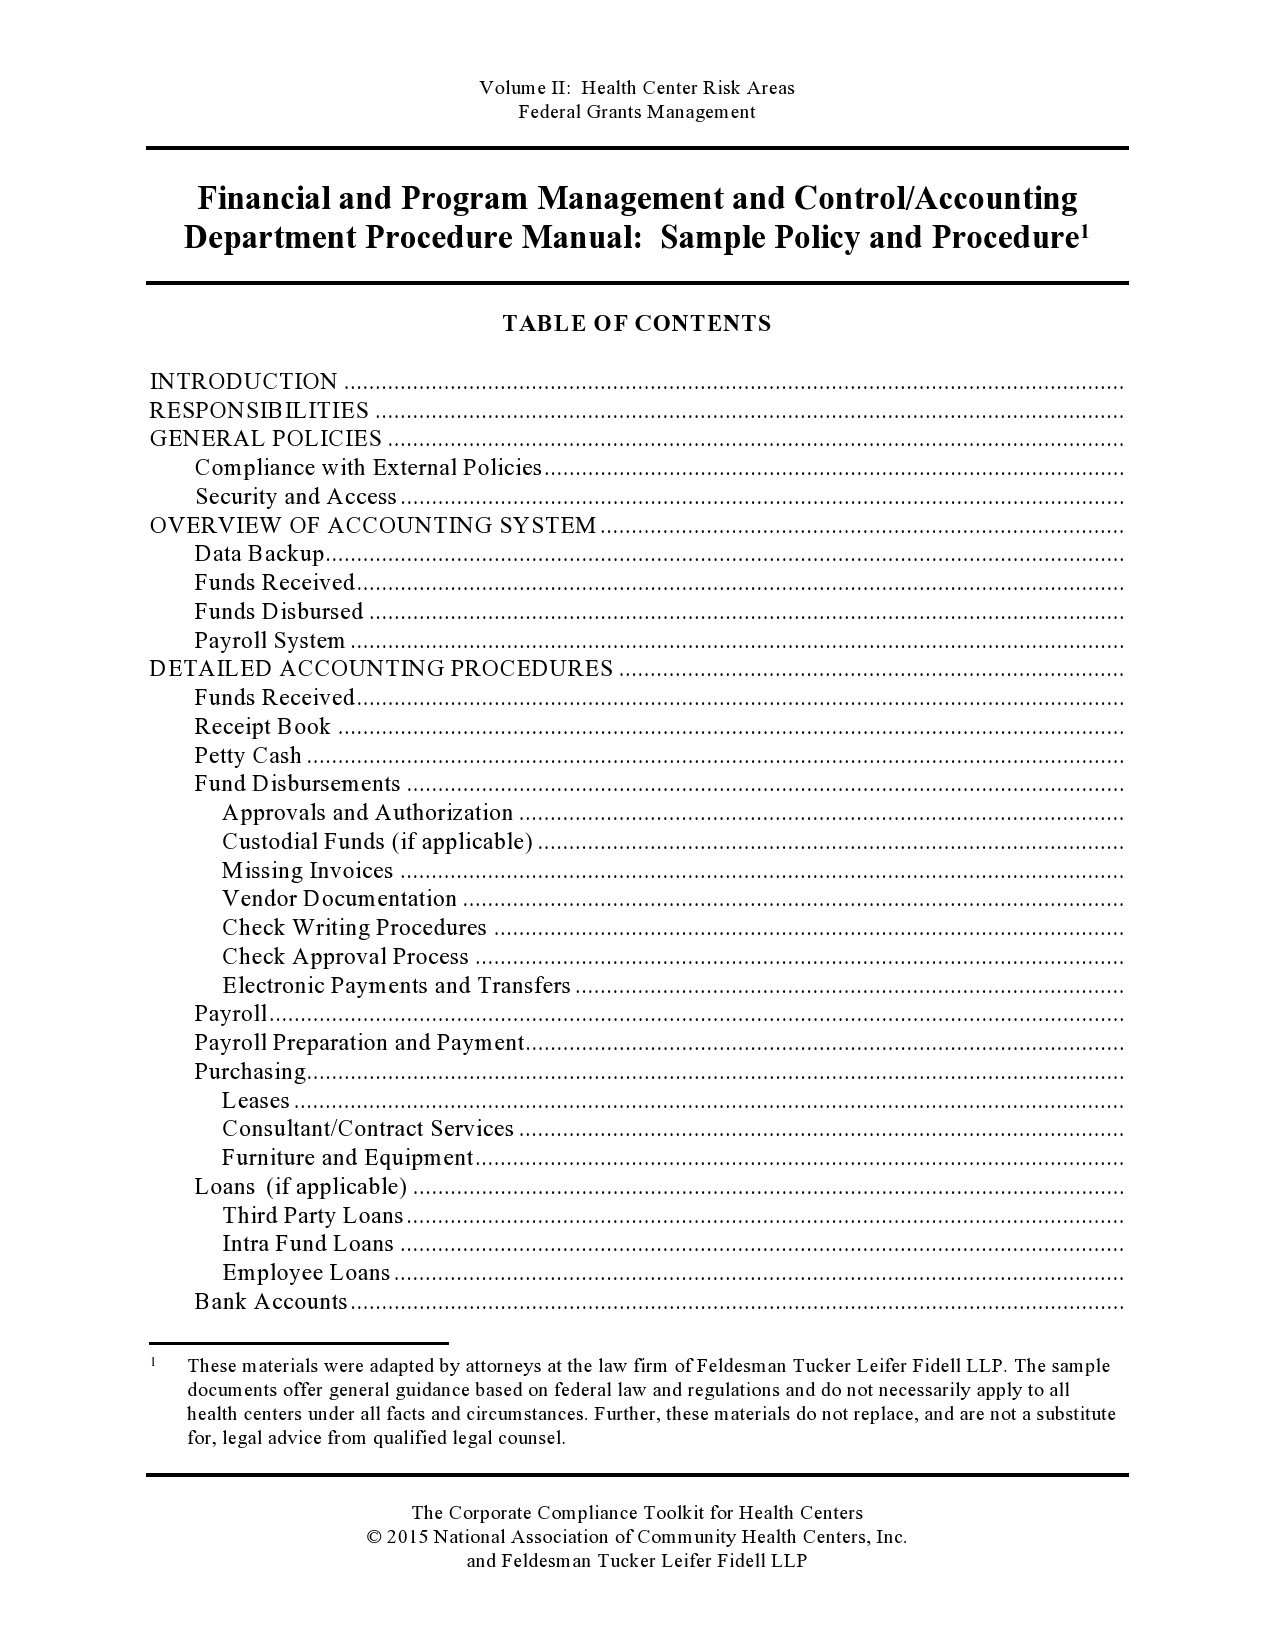 policy-and-procedure-template-examples-database-bank2home